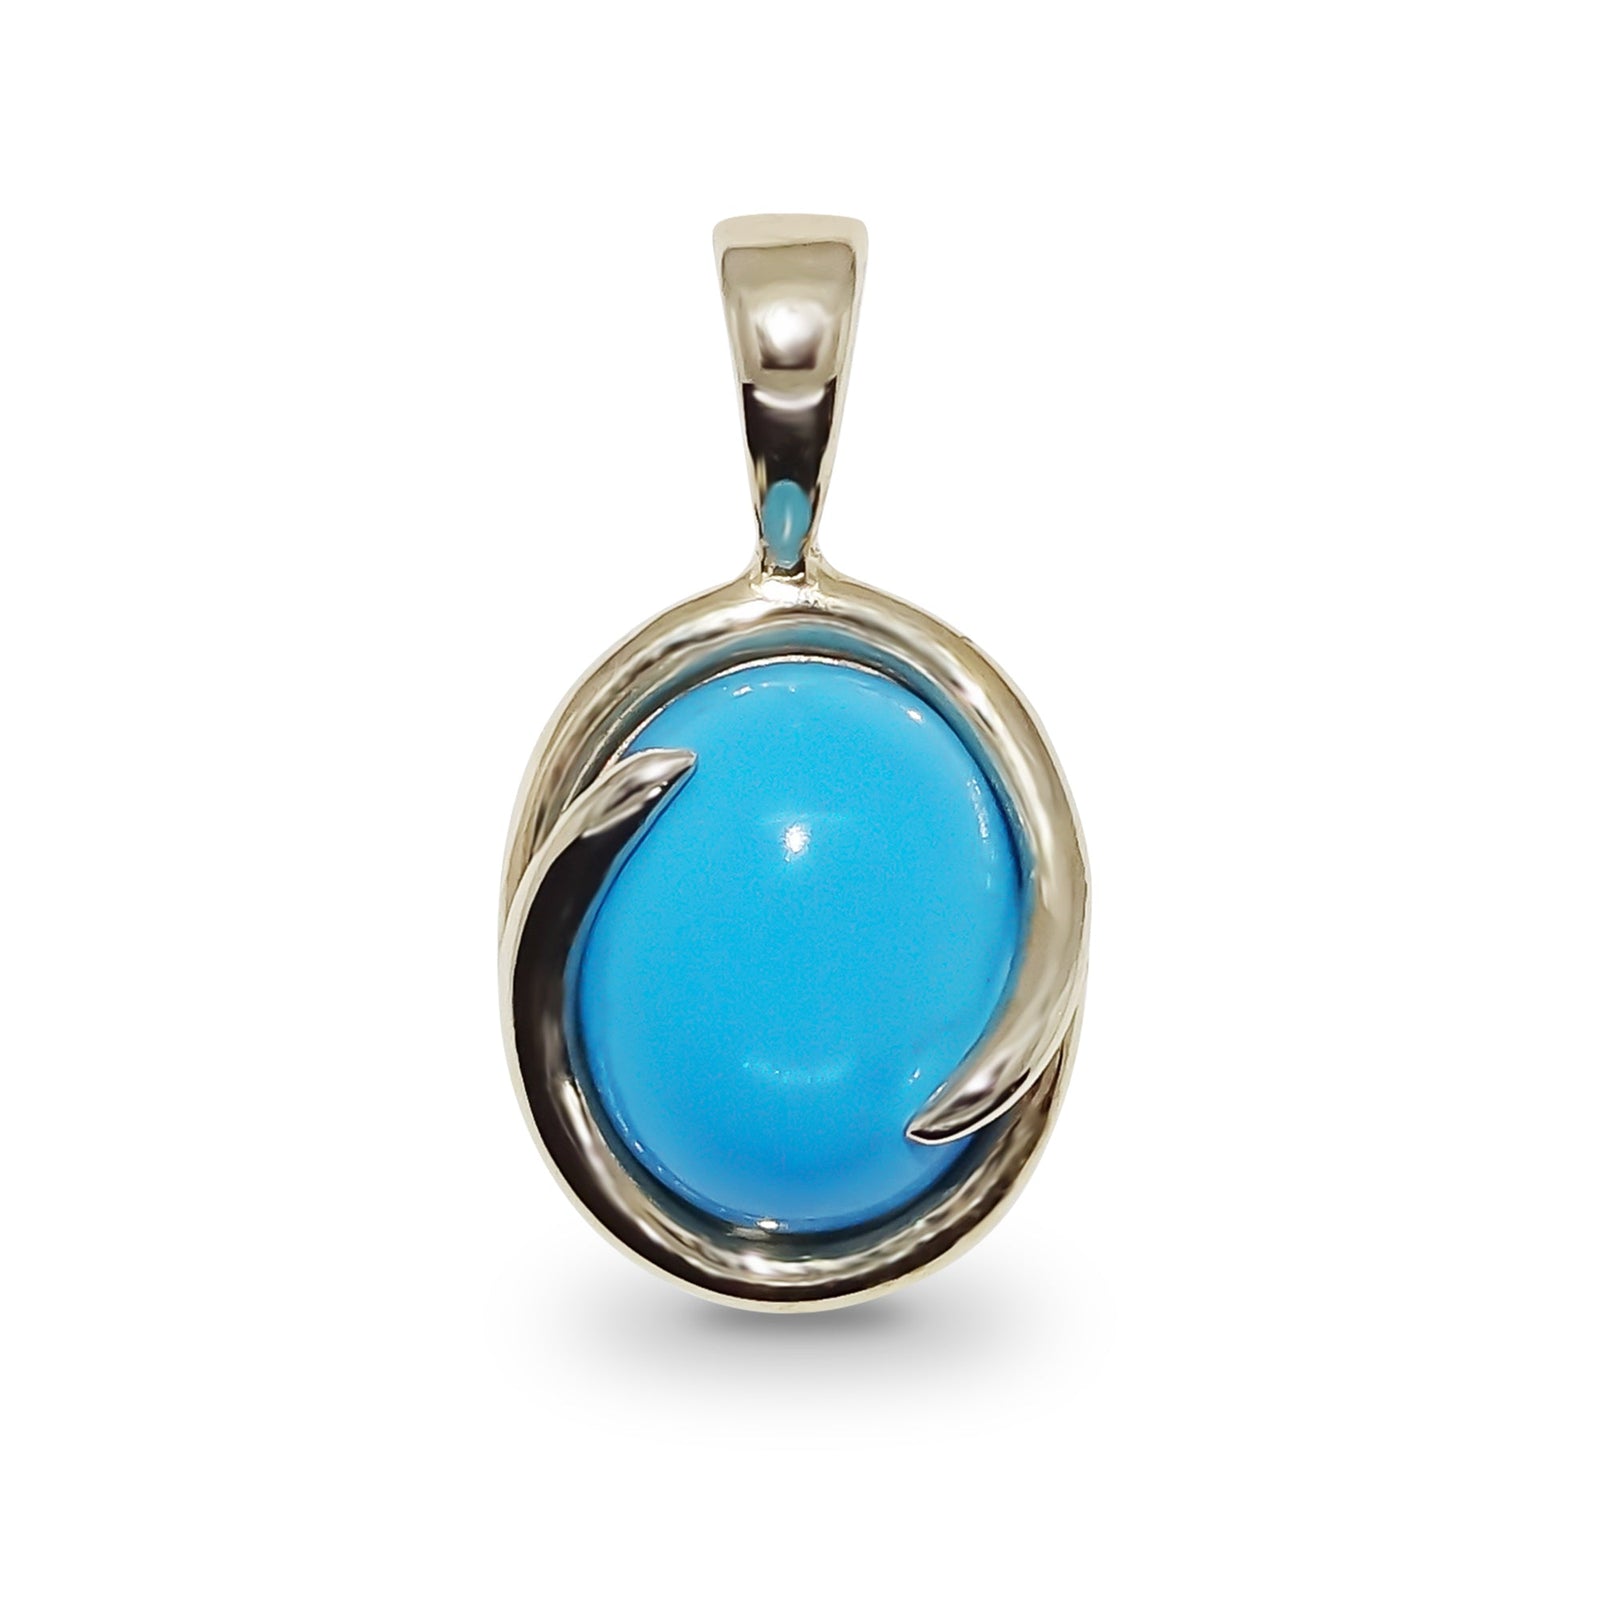 9ct gold 10x8mm oval created turquoise pendant